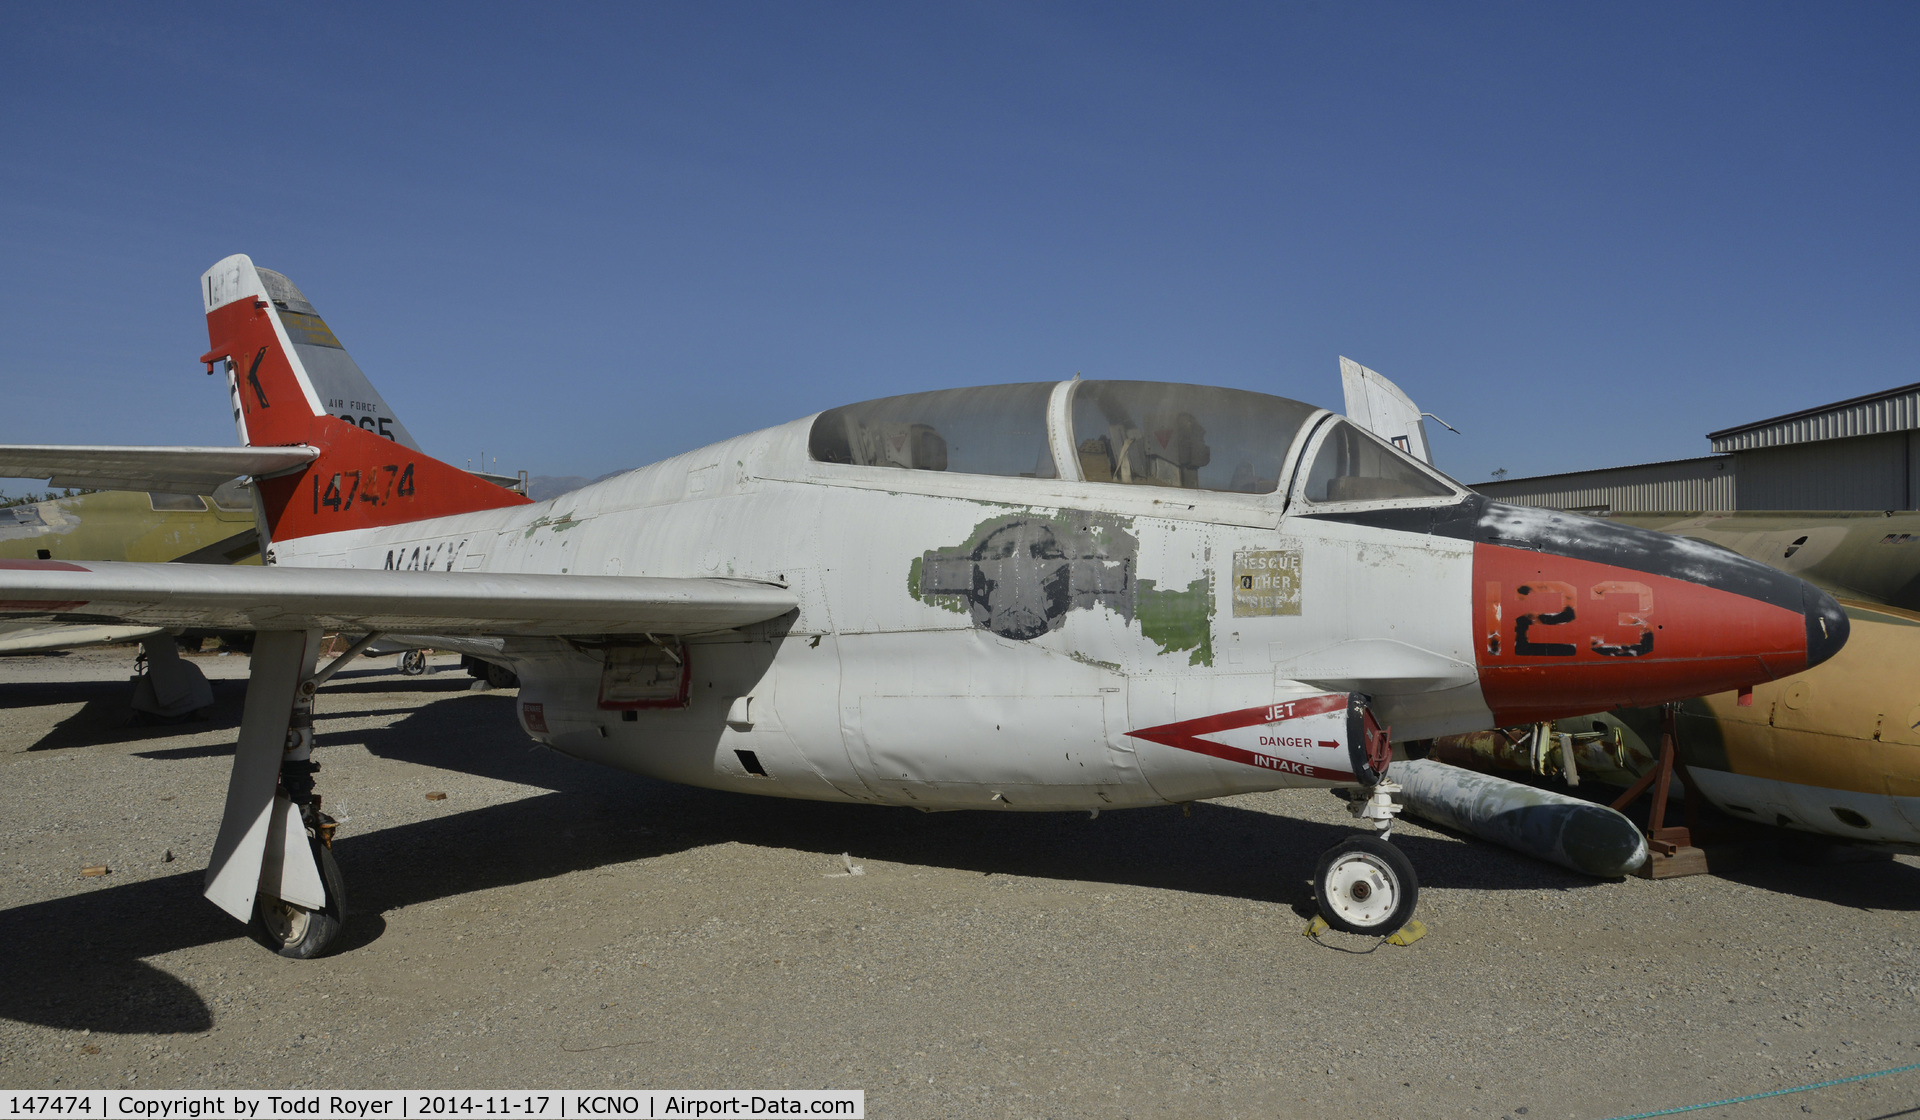 147474, North American T-2A Buckeye C/N 253-65, On display at the Planes of Fame Chino location